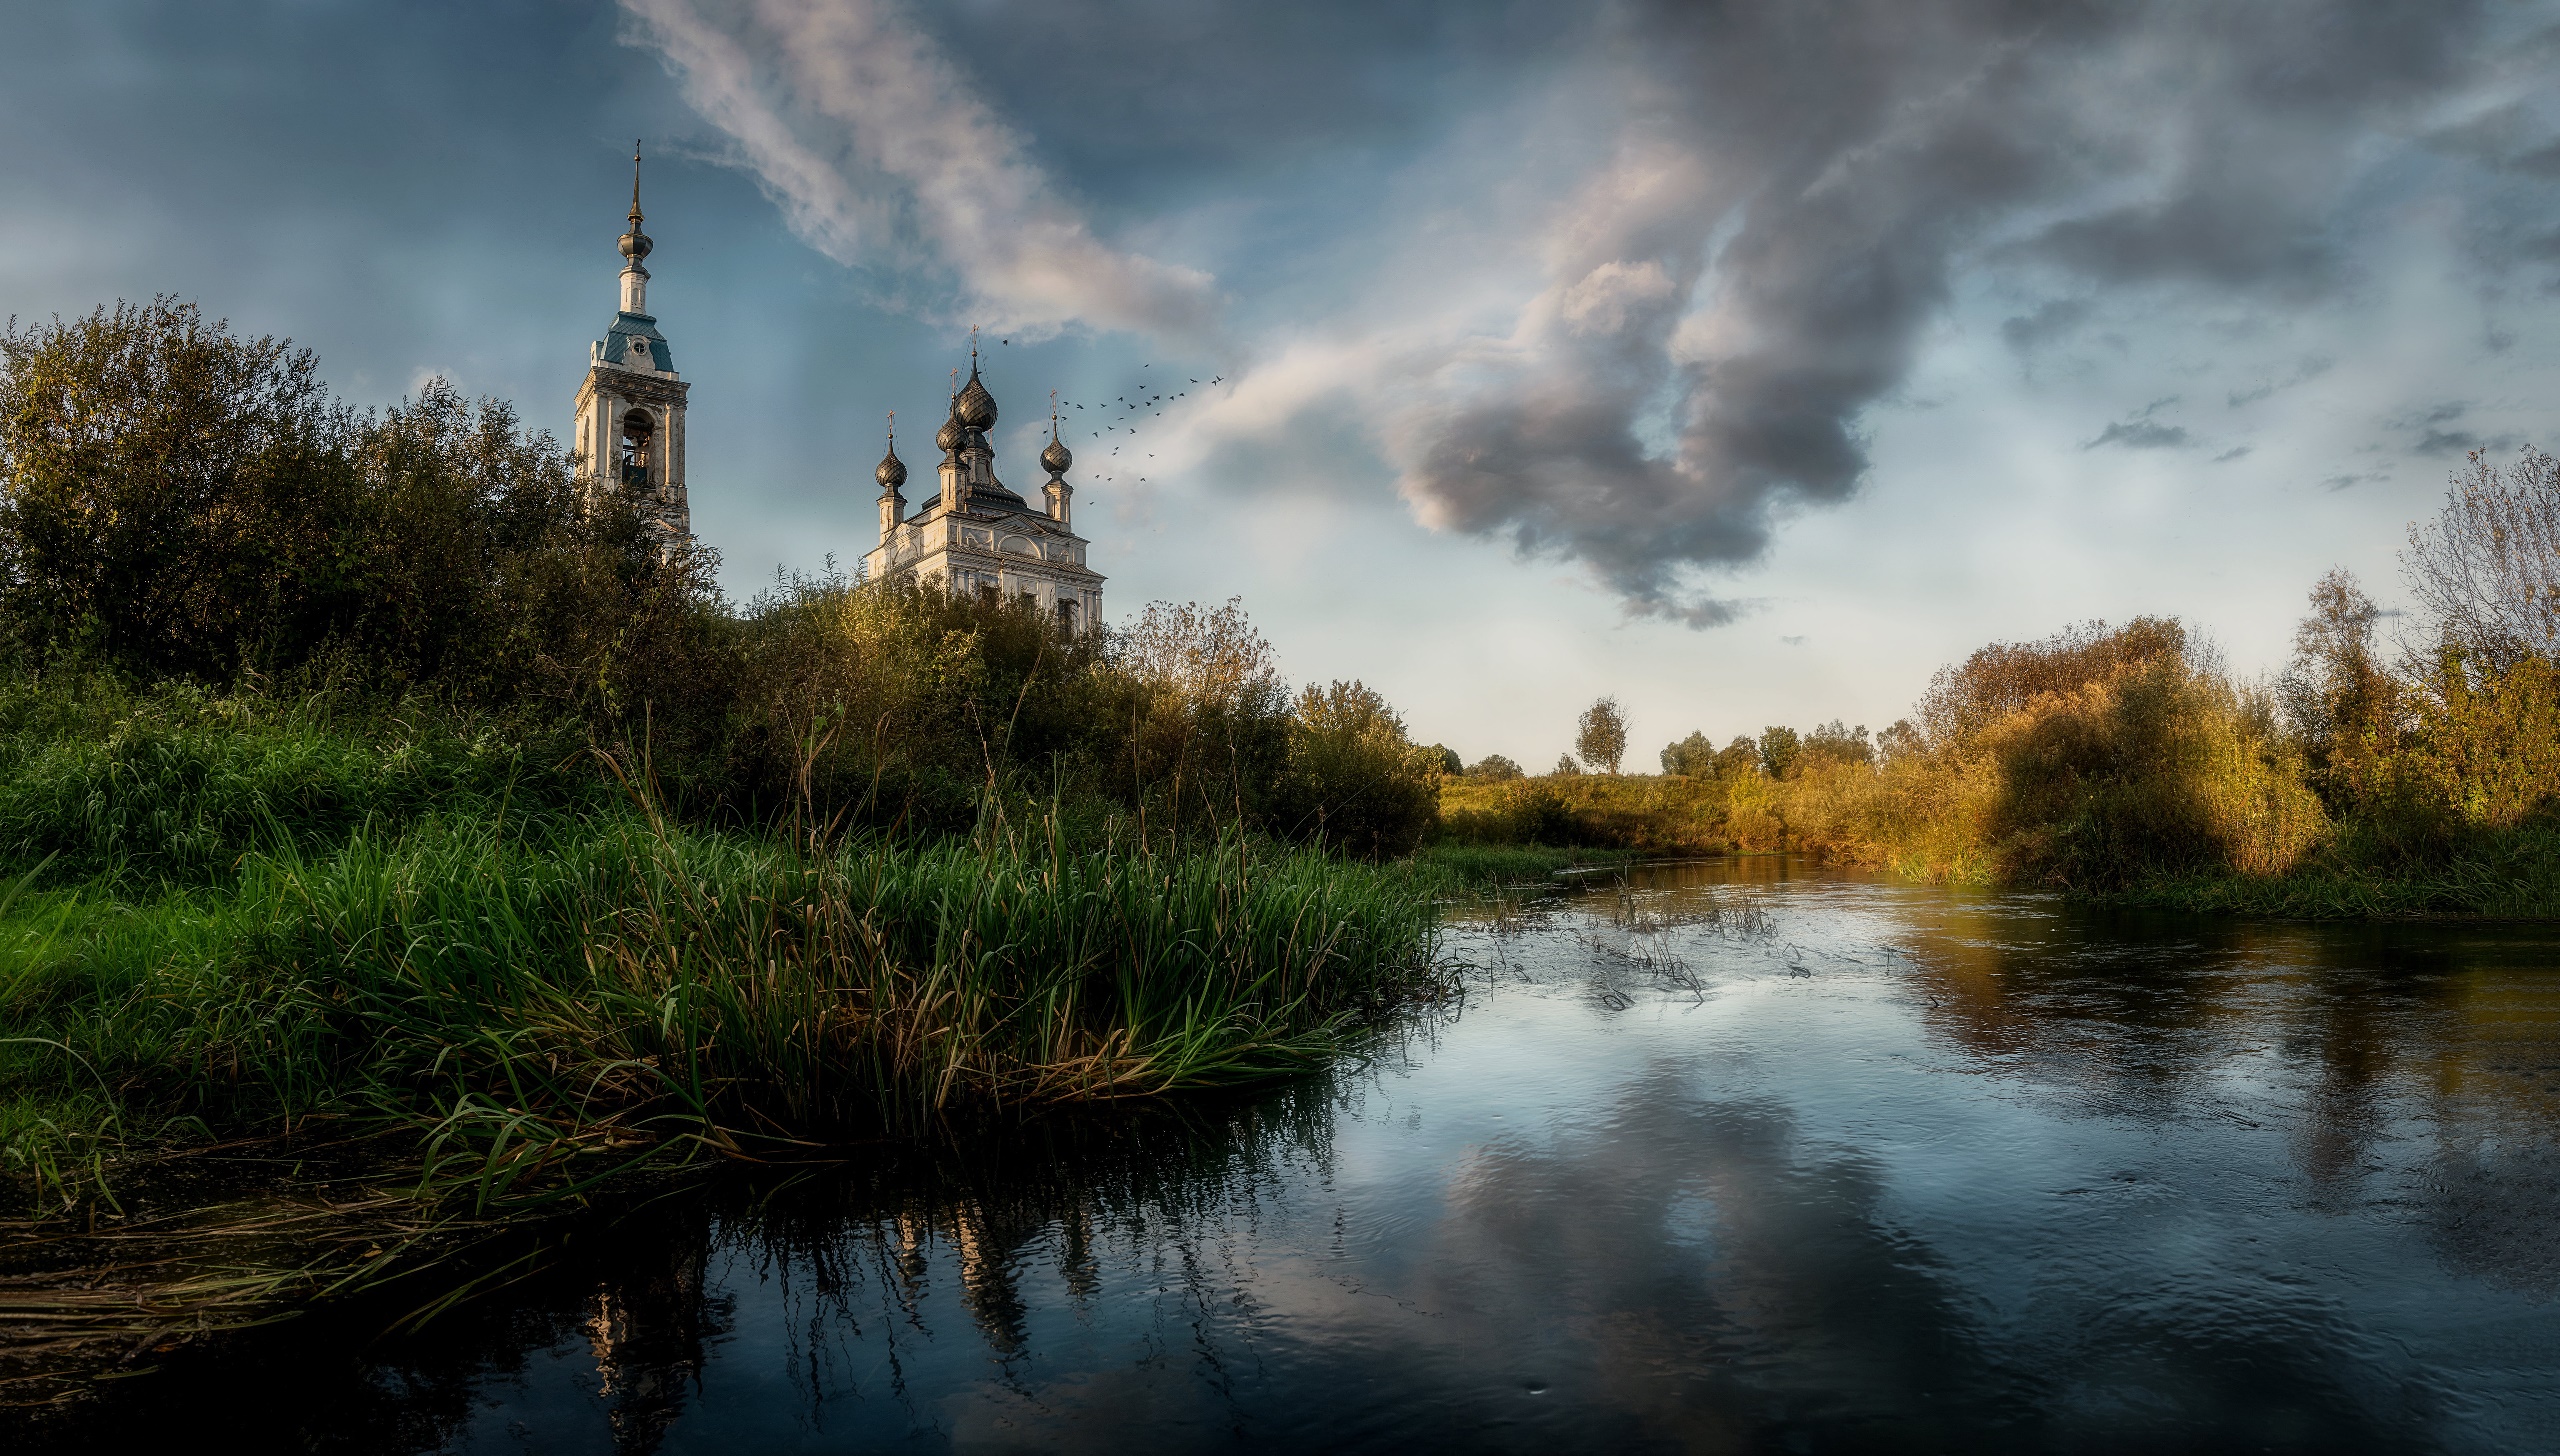 General 2560x1456 river water church Russia outdoors